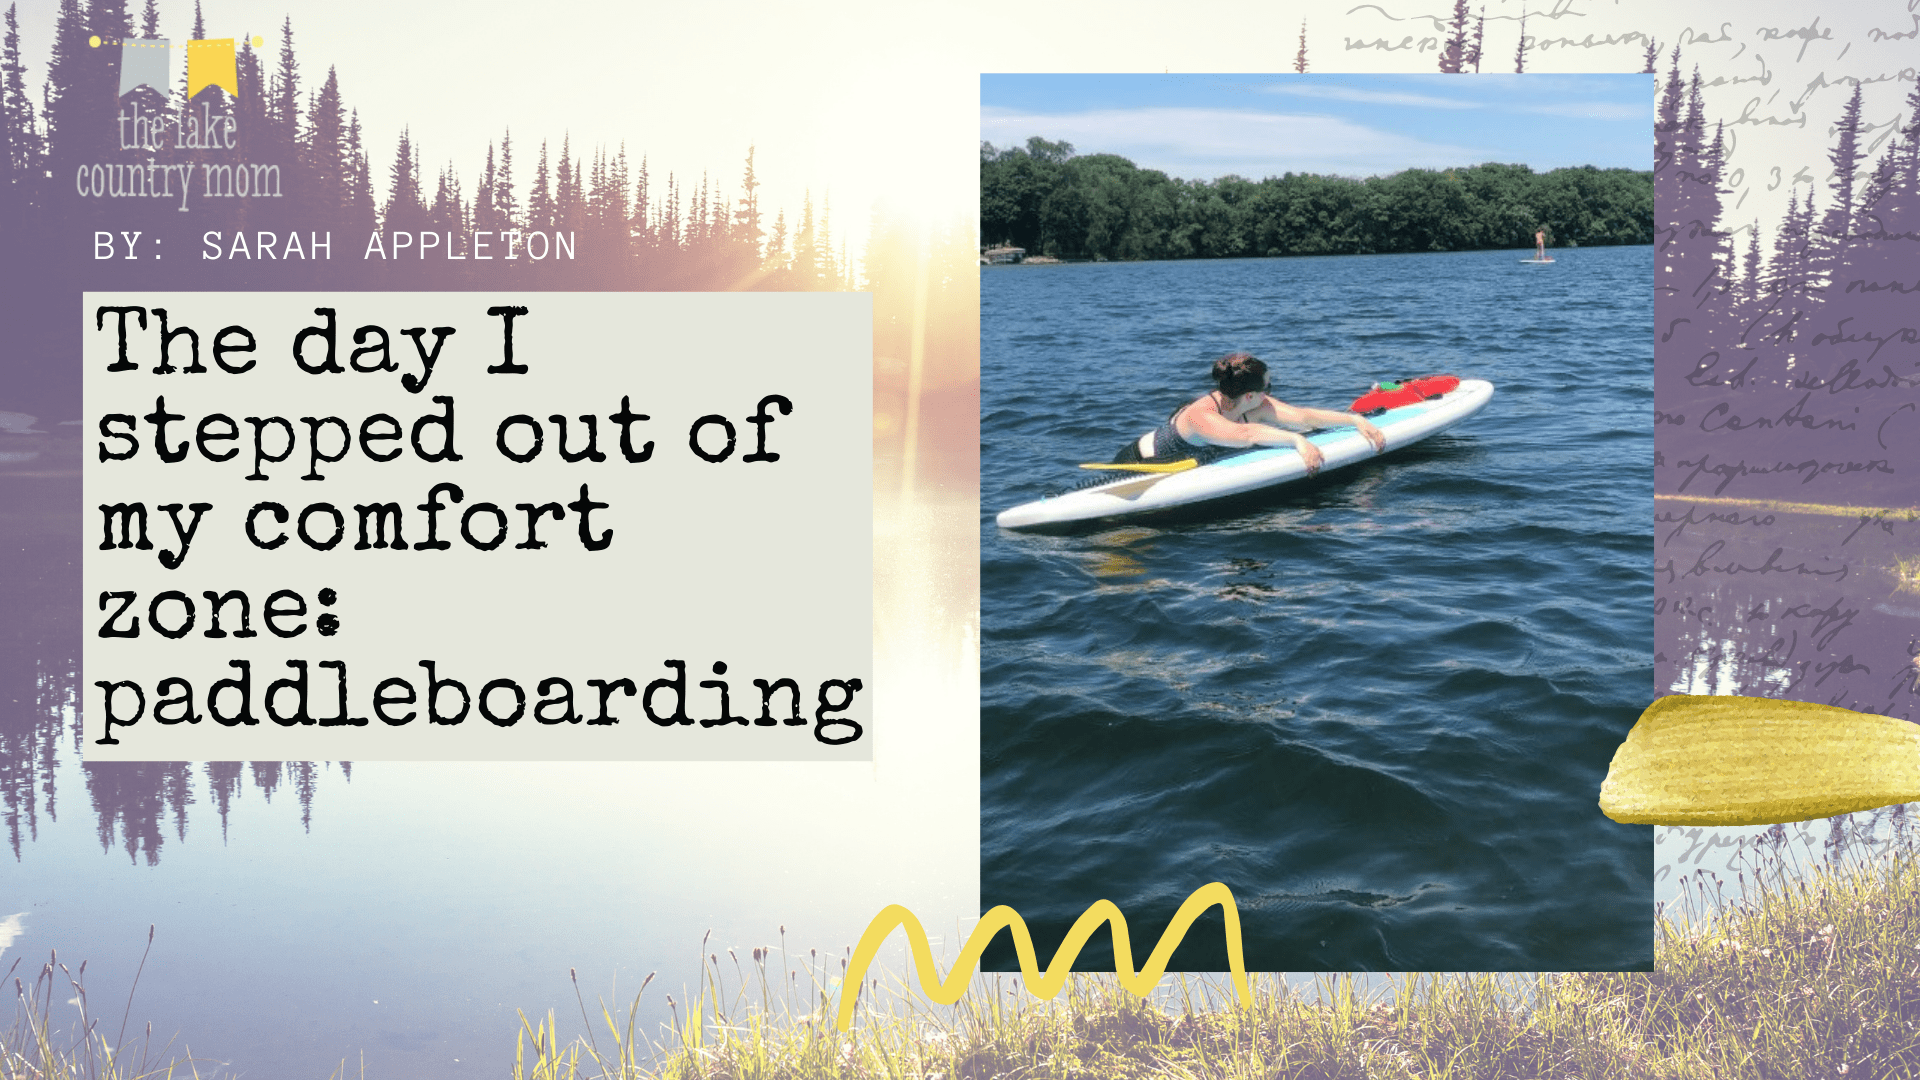 The day I stepped out of my comfort zone: paddleboarding